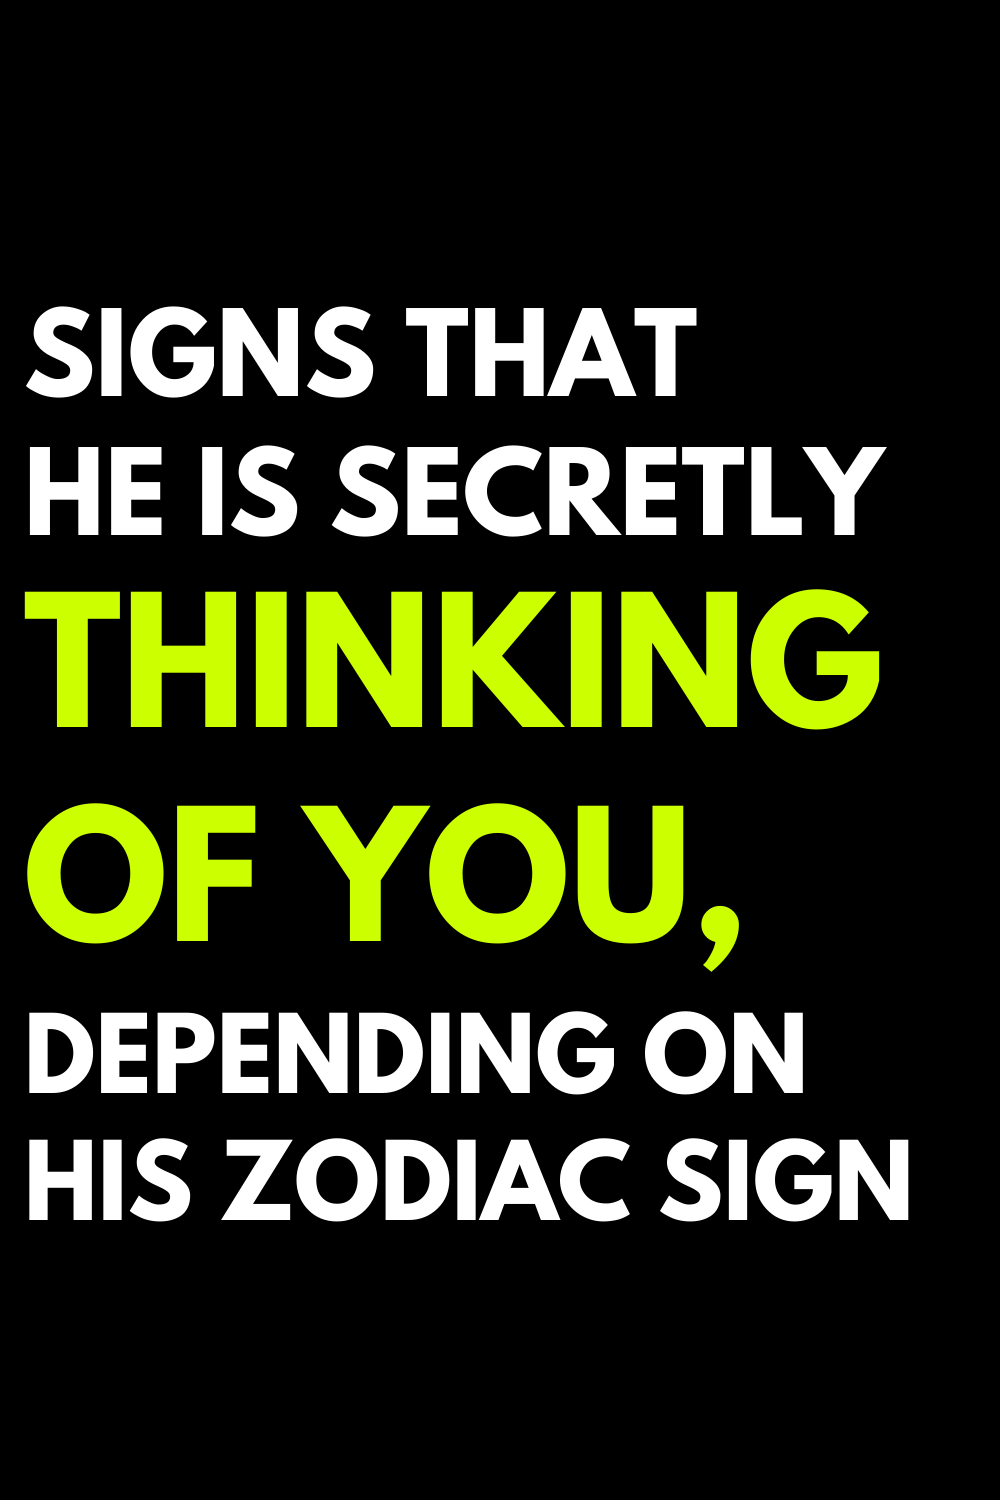 Signs that he is secretly thinking of you, depending on his zodiac sign